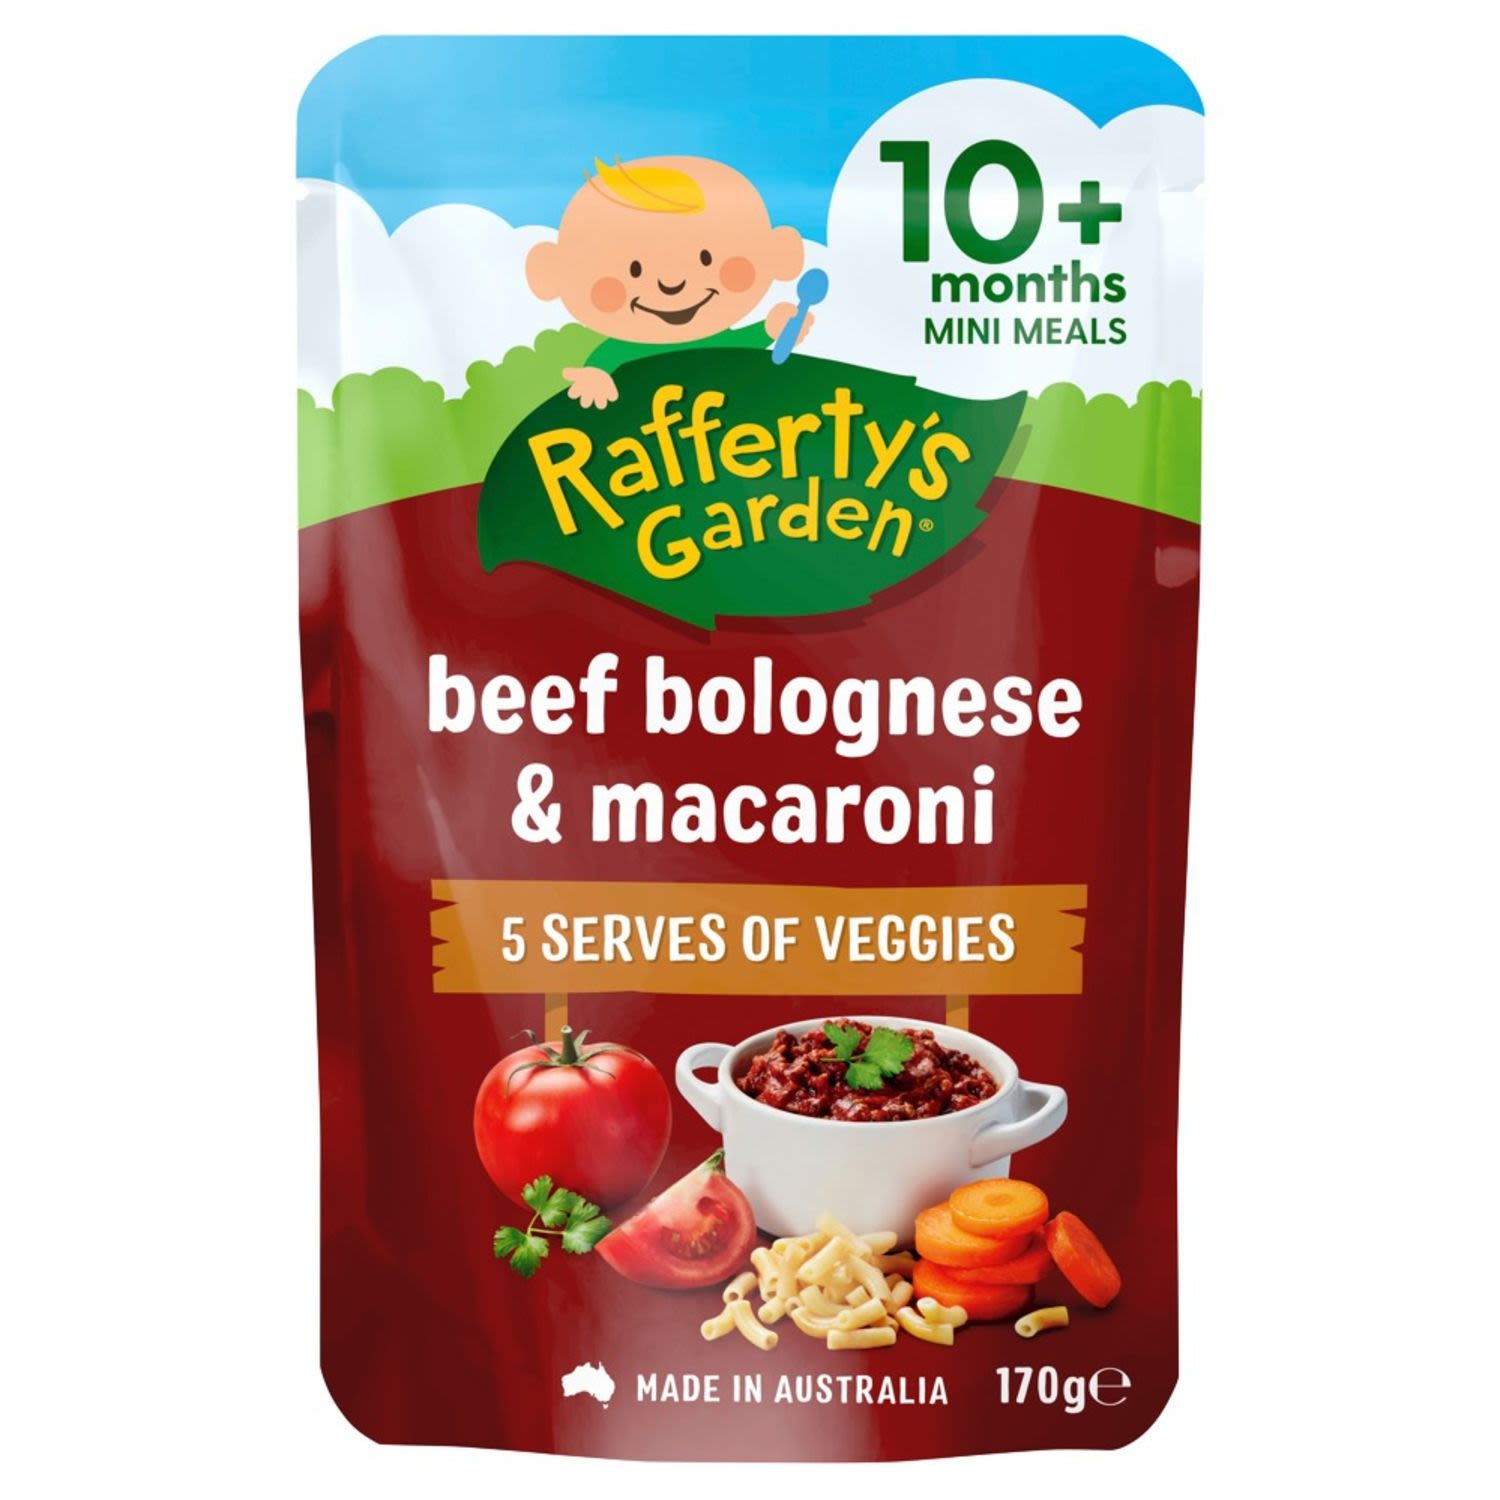 Rafferty's Garden Baby's Bolognese with Macaroni 10+ Months Baby Food, 170 Gram